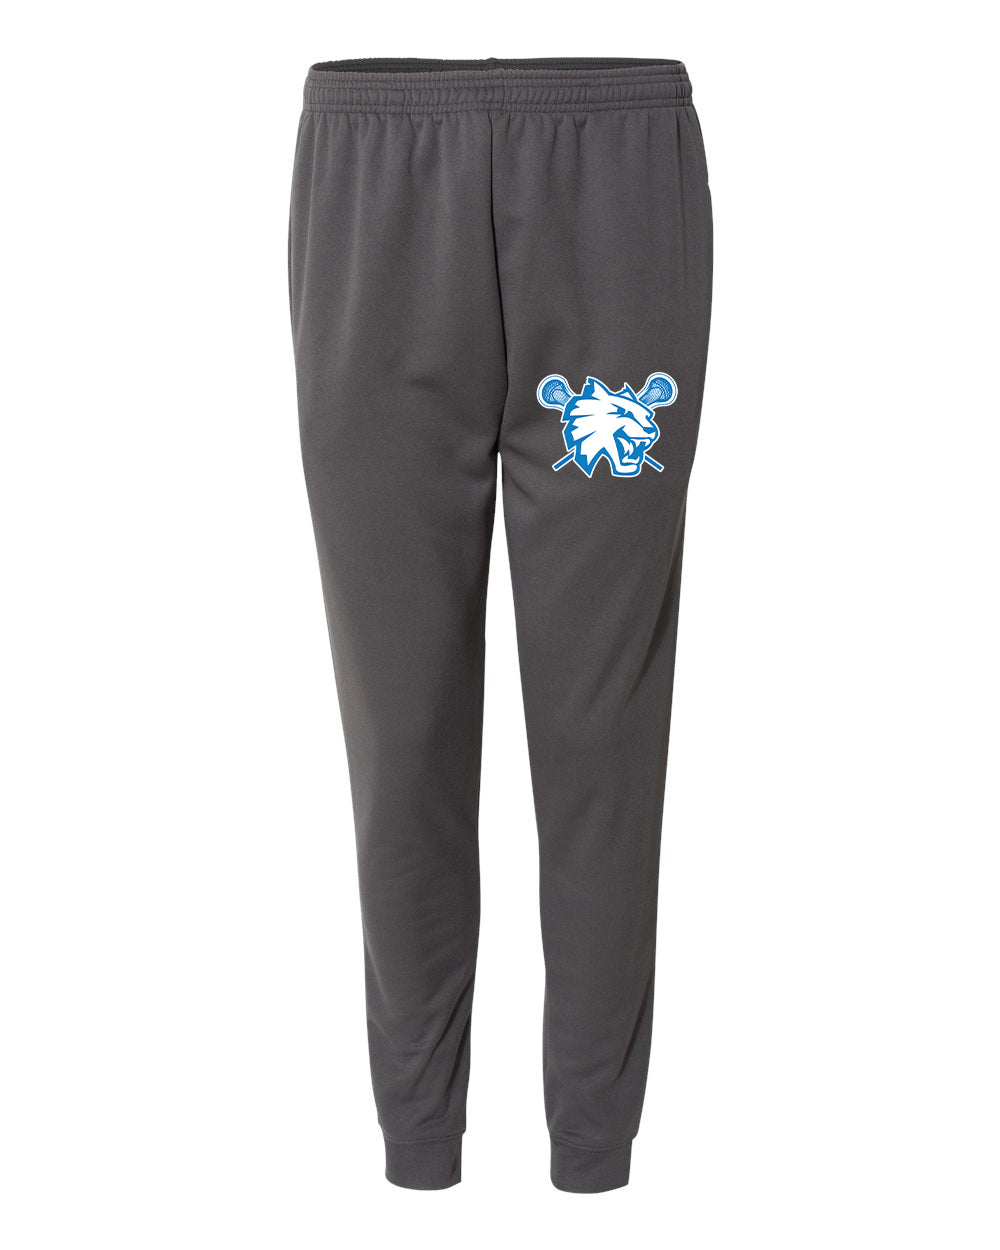 Suffield Youth Lacrosse - Adult Joggers - 1475 (color options available)